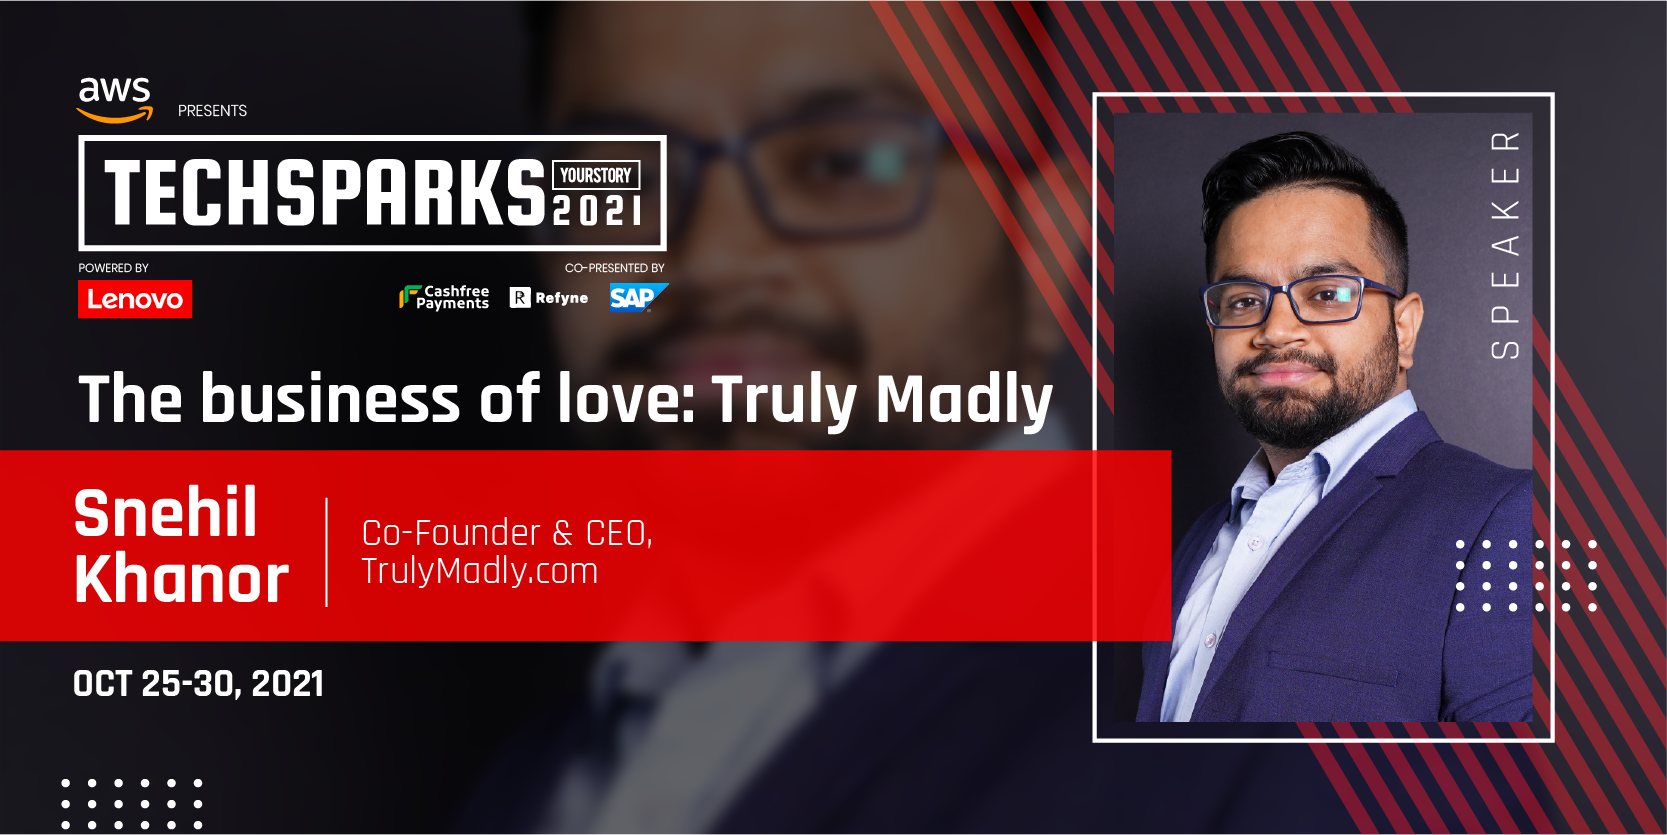 TrulyMadly’s plan to reach Bharat users to help people find love